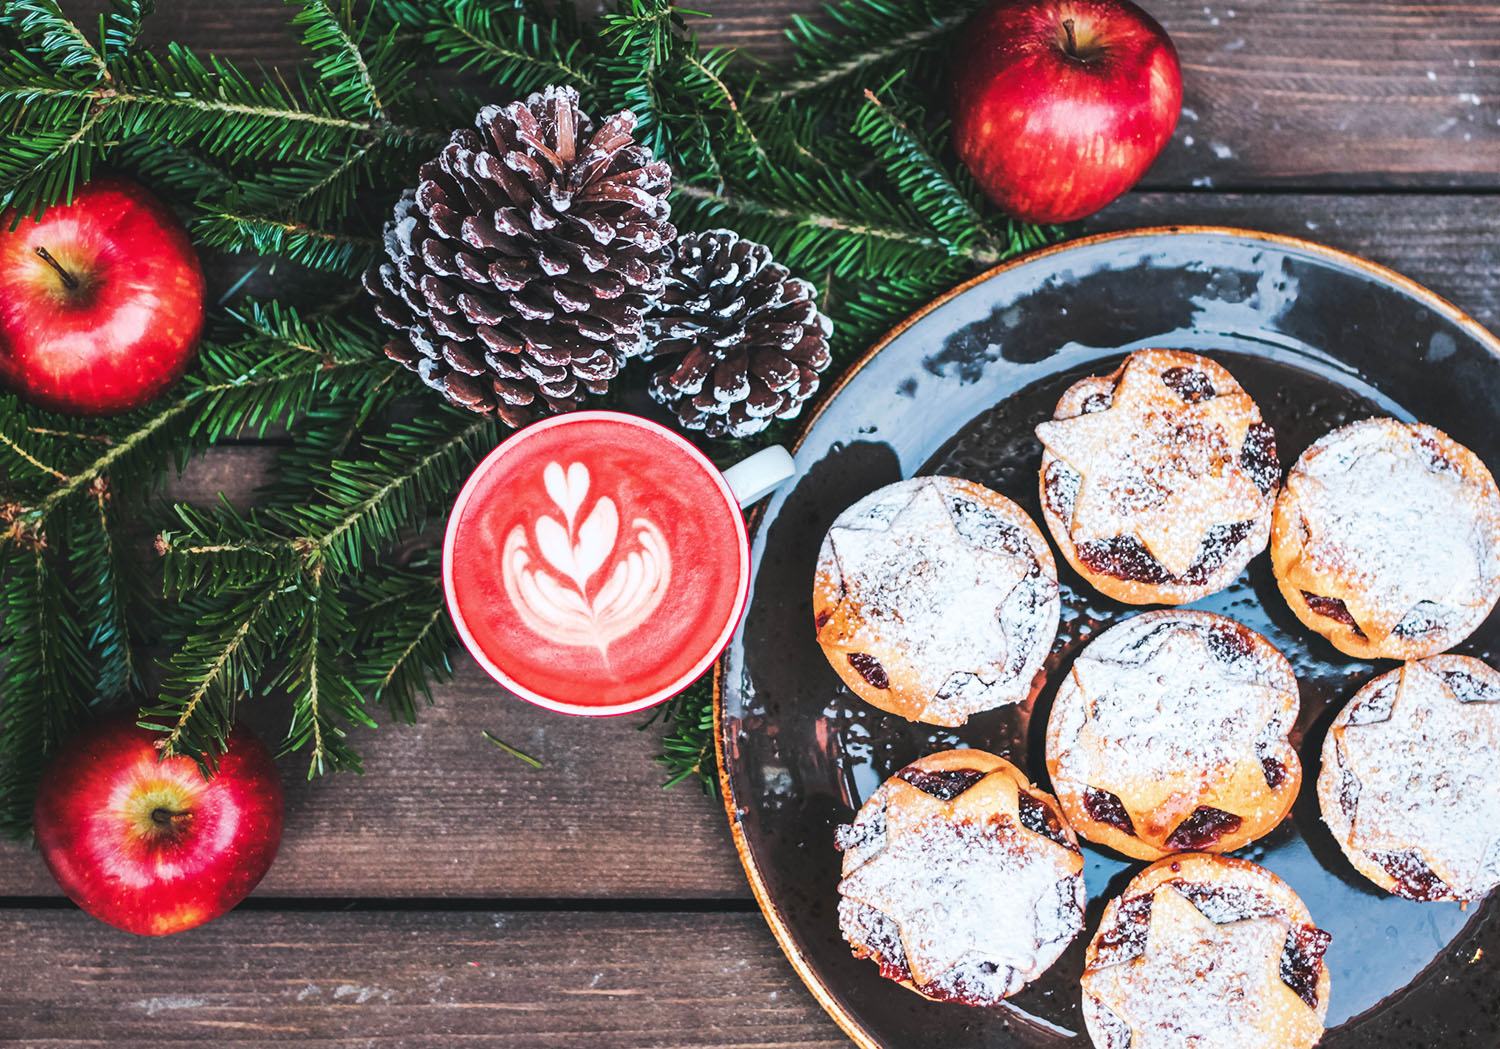 Mince Pies for Santa